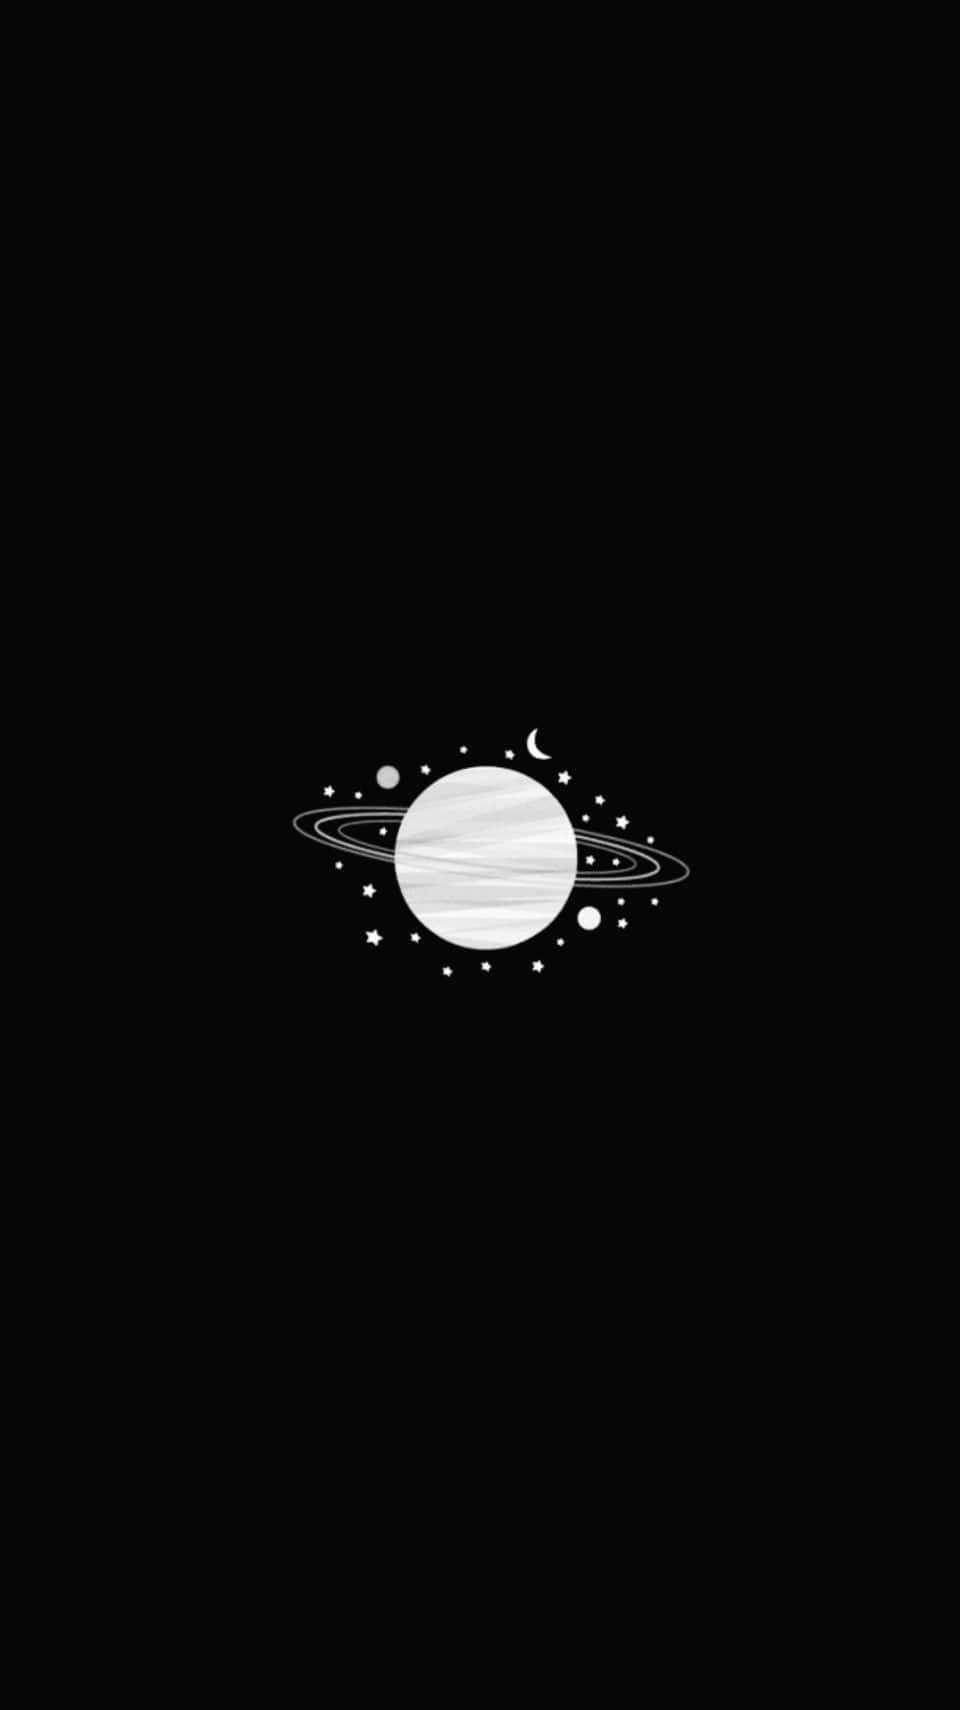 A White Image Of A Planet On A Black Background Wallpaper